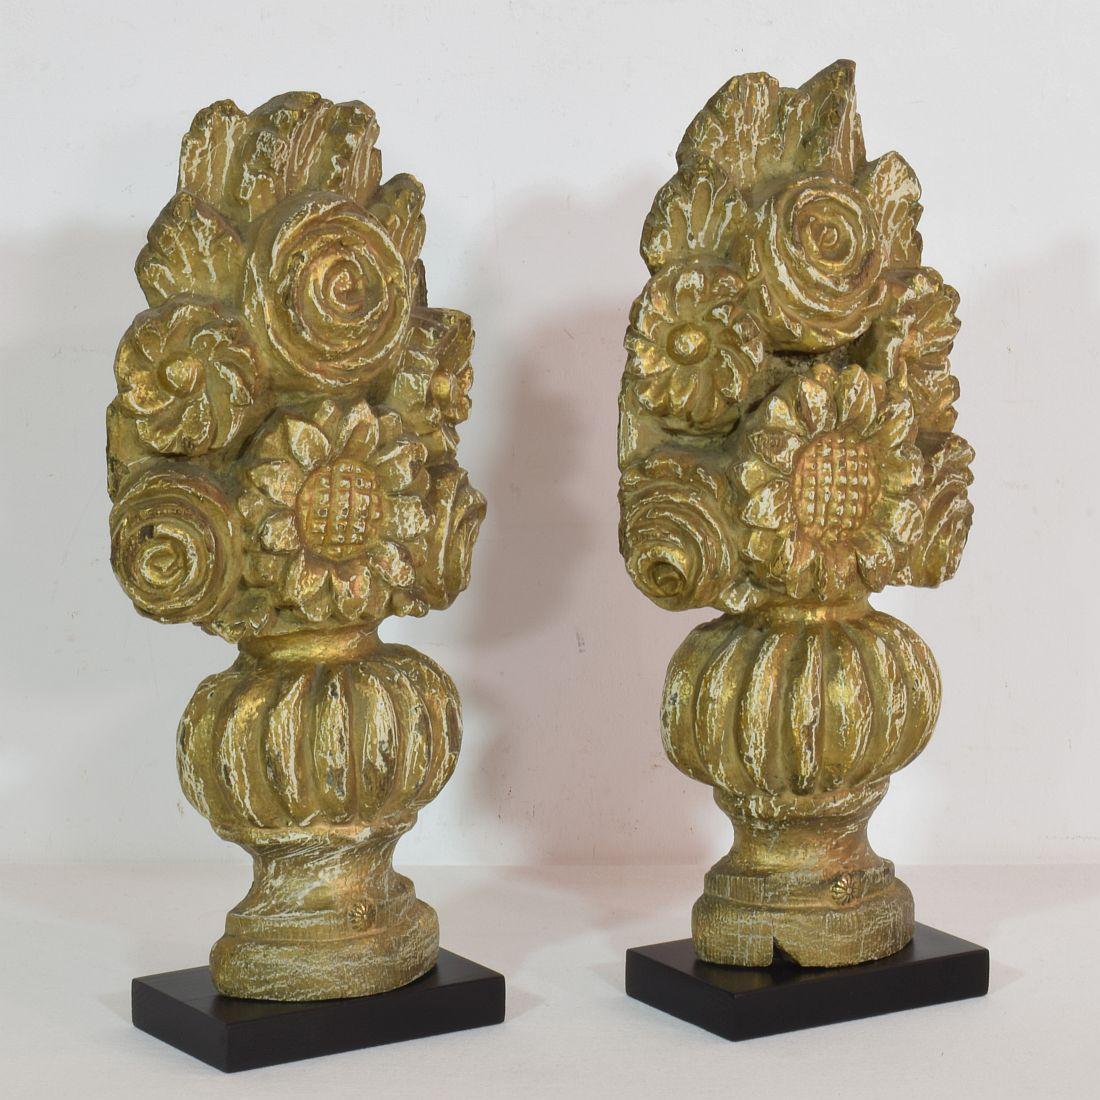 Hand-Carved Pair 18th Century French Handcarved Baroque Vase Ornaments